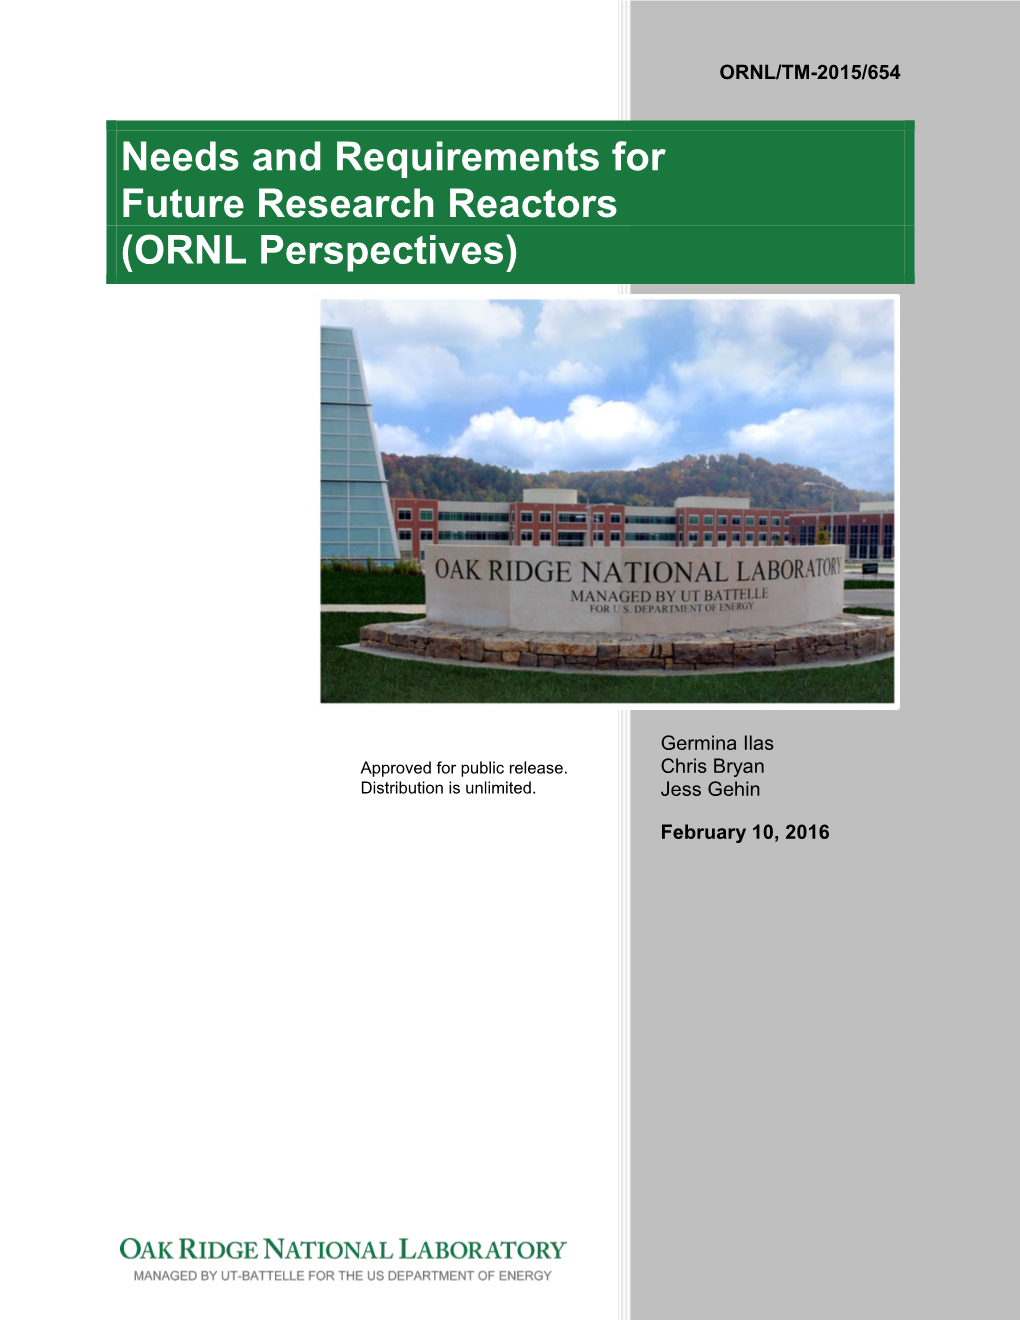 Needs and Requirements for Future Research Reactors (ORNL Perspectives)